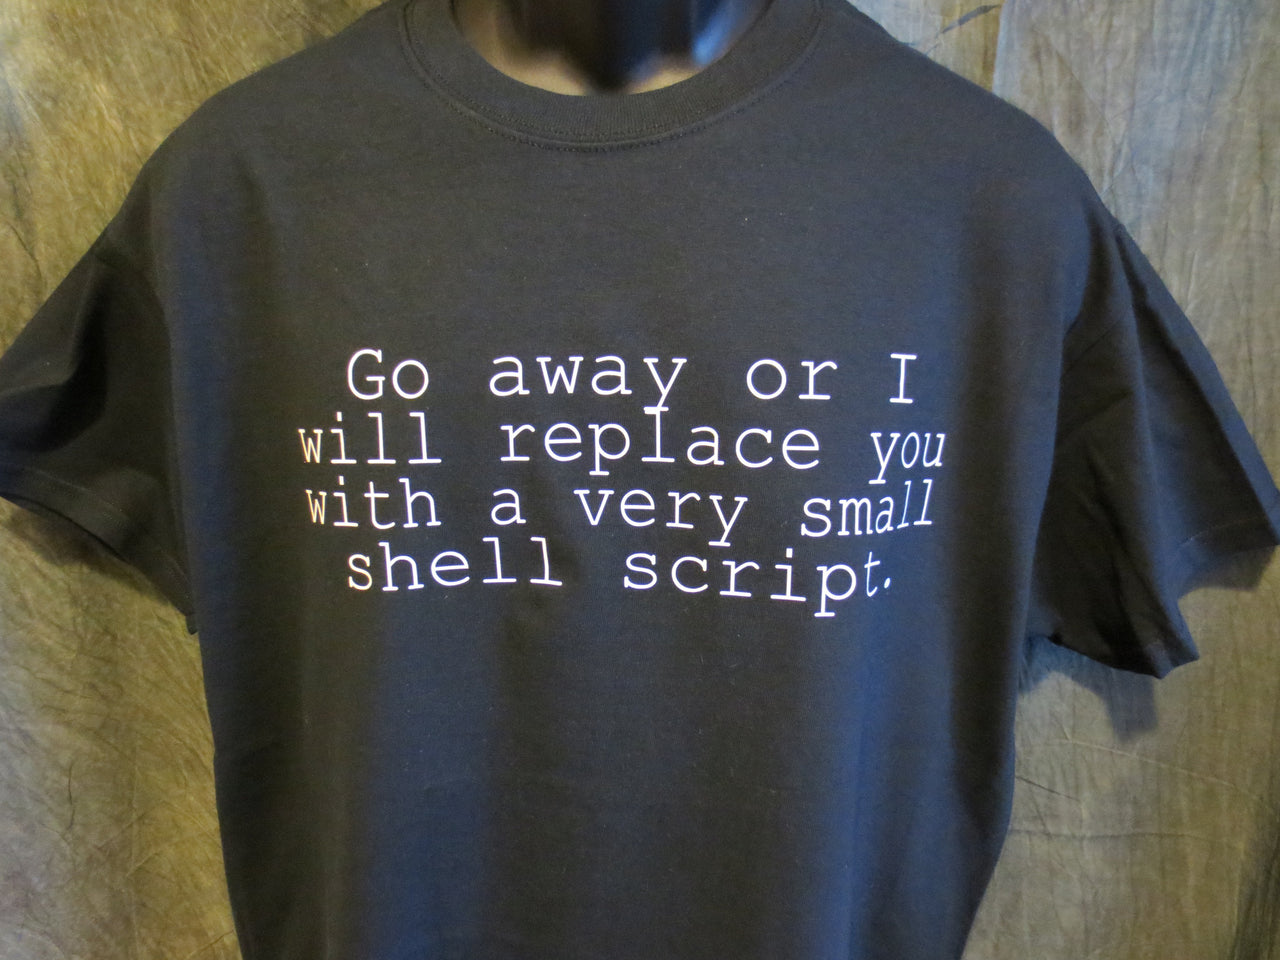 Go Away or I will Replace you With a Very Small Shell Script Tshirt: Black With White Print - TshirtNow.net - 3